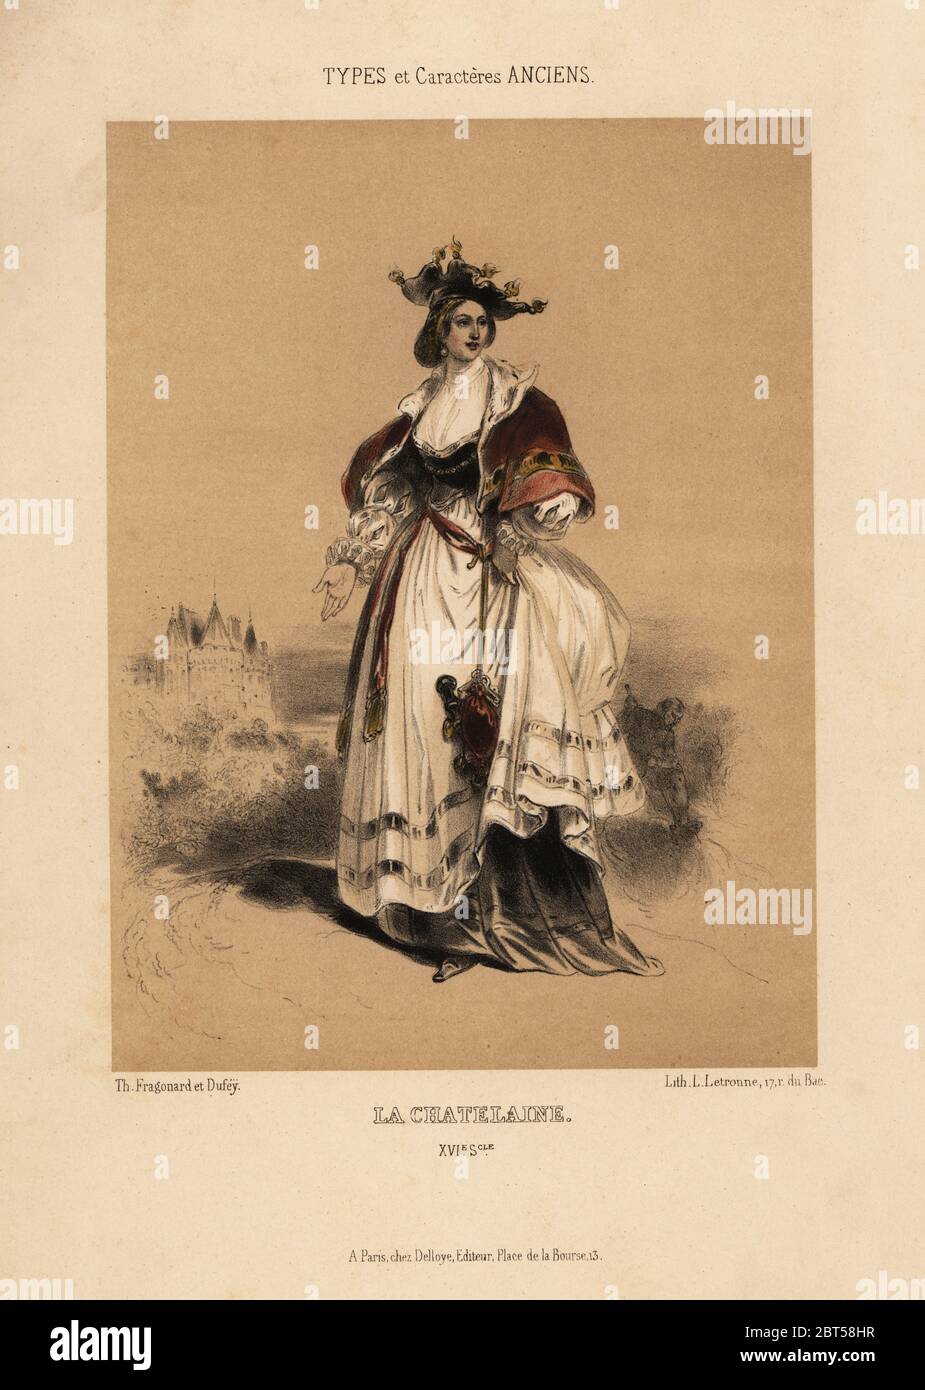 La Chatelaine, 16th century. Dutch woman wearing a chatelaine belt clasp with purse, keys, etc., hanging from it. The chatelaine was a fashion item in Zeeland in the 16th century. Chromolithograph by Louis Rene Letronne after an illustration by Th. Fragonard et Dufey from Le Keepsake Francais with 12 plates from A. Mazuys Types et Caracteres Anciens, dapres des Documents Peints ou Ecrits, chez Delloye, Paris, 1841. Stock Photo